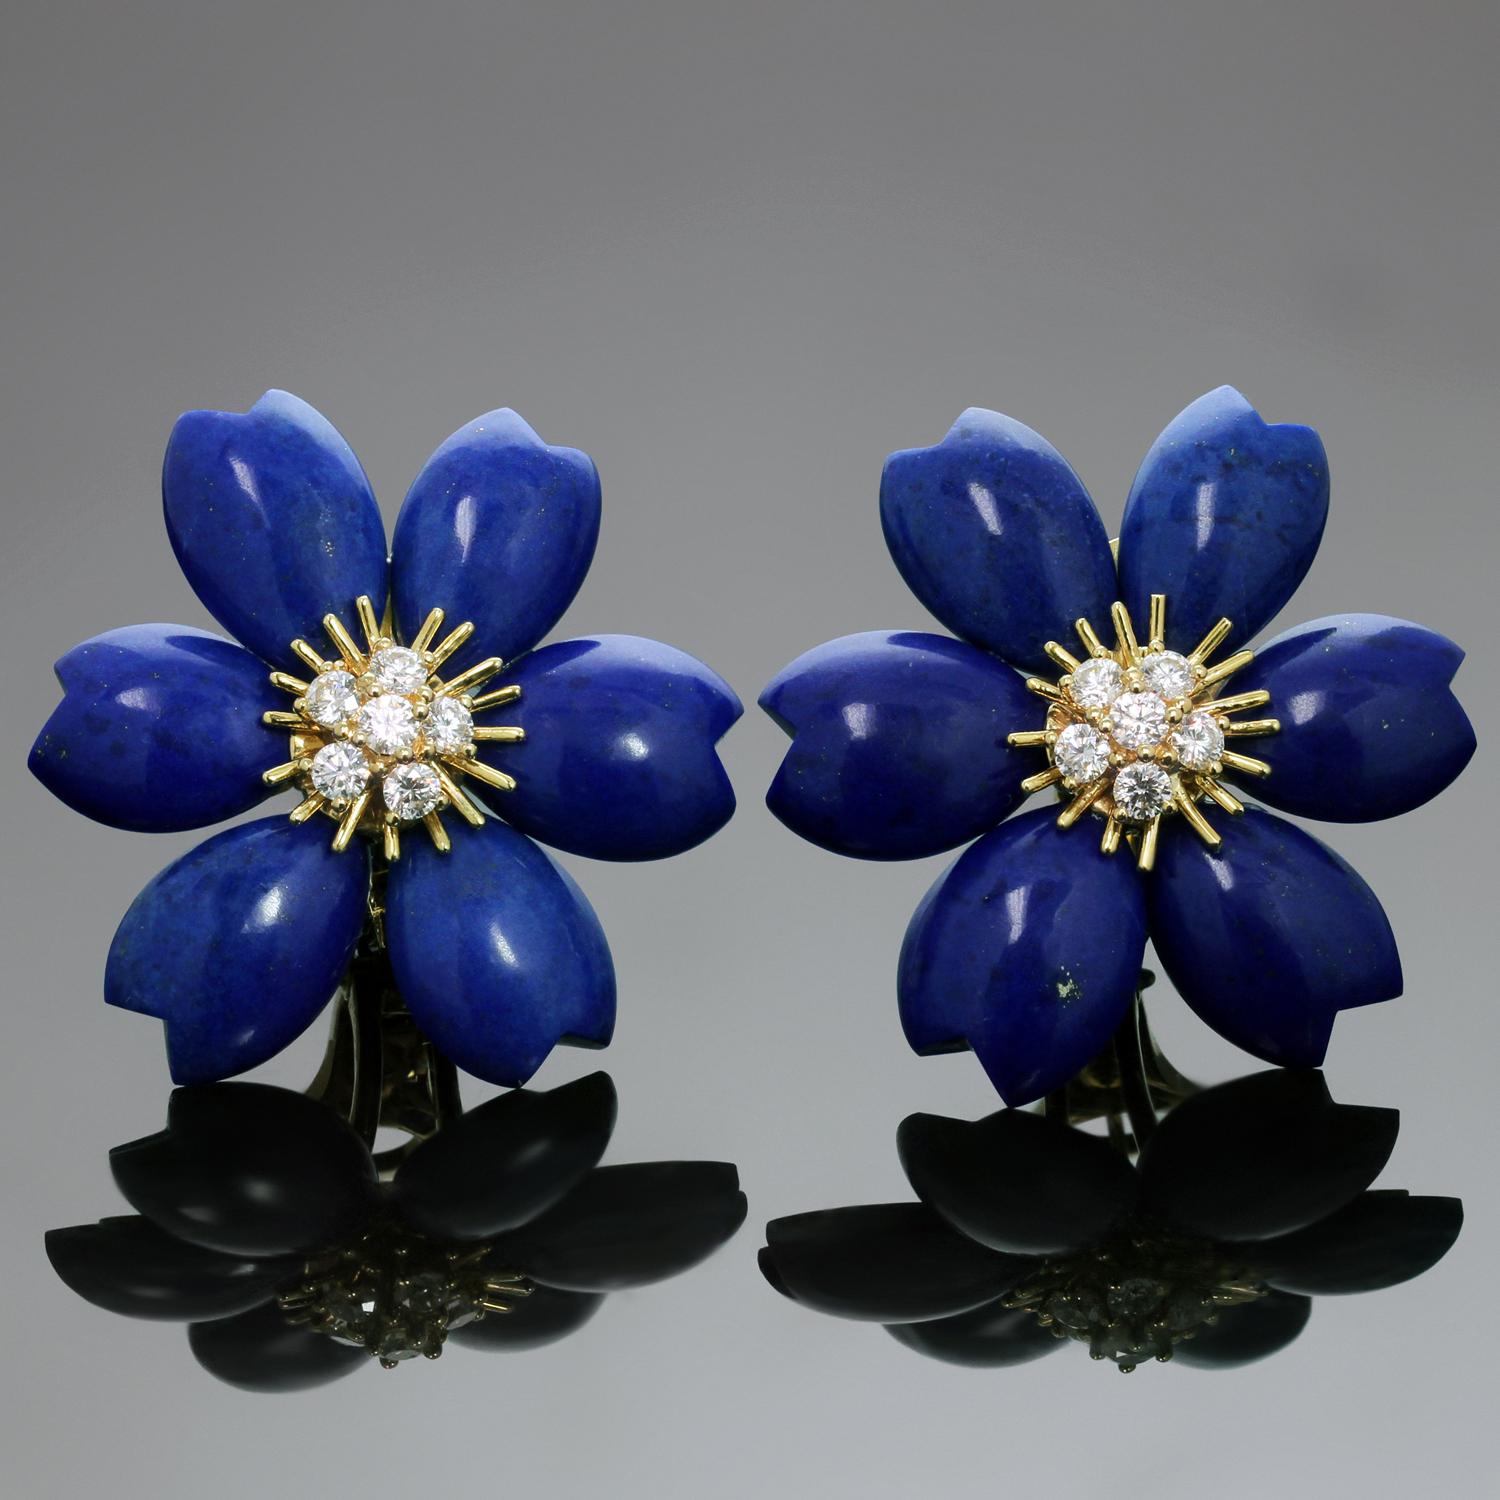 These sophisticated earrings from the iconic Rose De Noel collection by Van Cleef & Arpels are crafted in 18k yellow gold and feature delicate flower design composed of blue lapis lazuli petals and sparkling centers prong-set with brilliant-cut